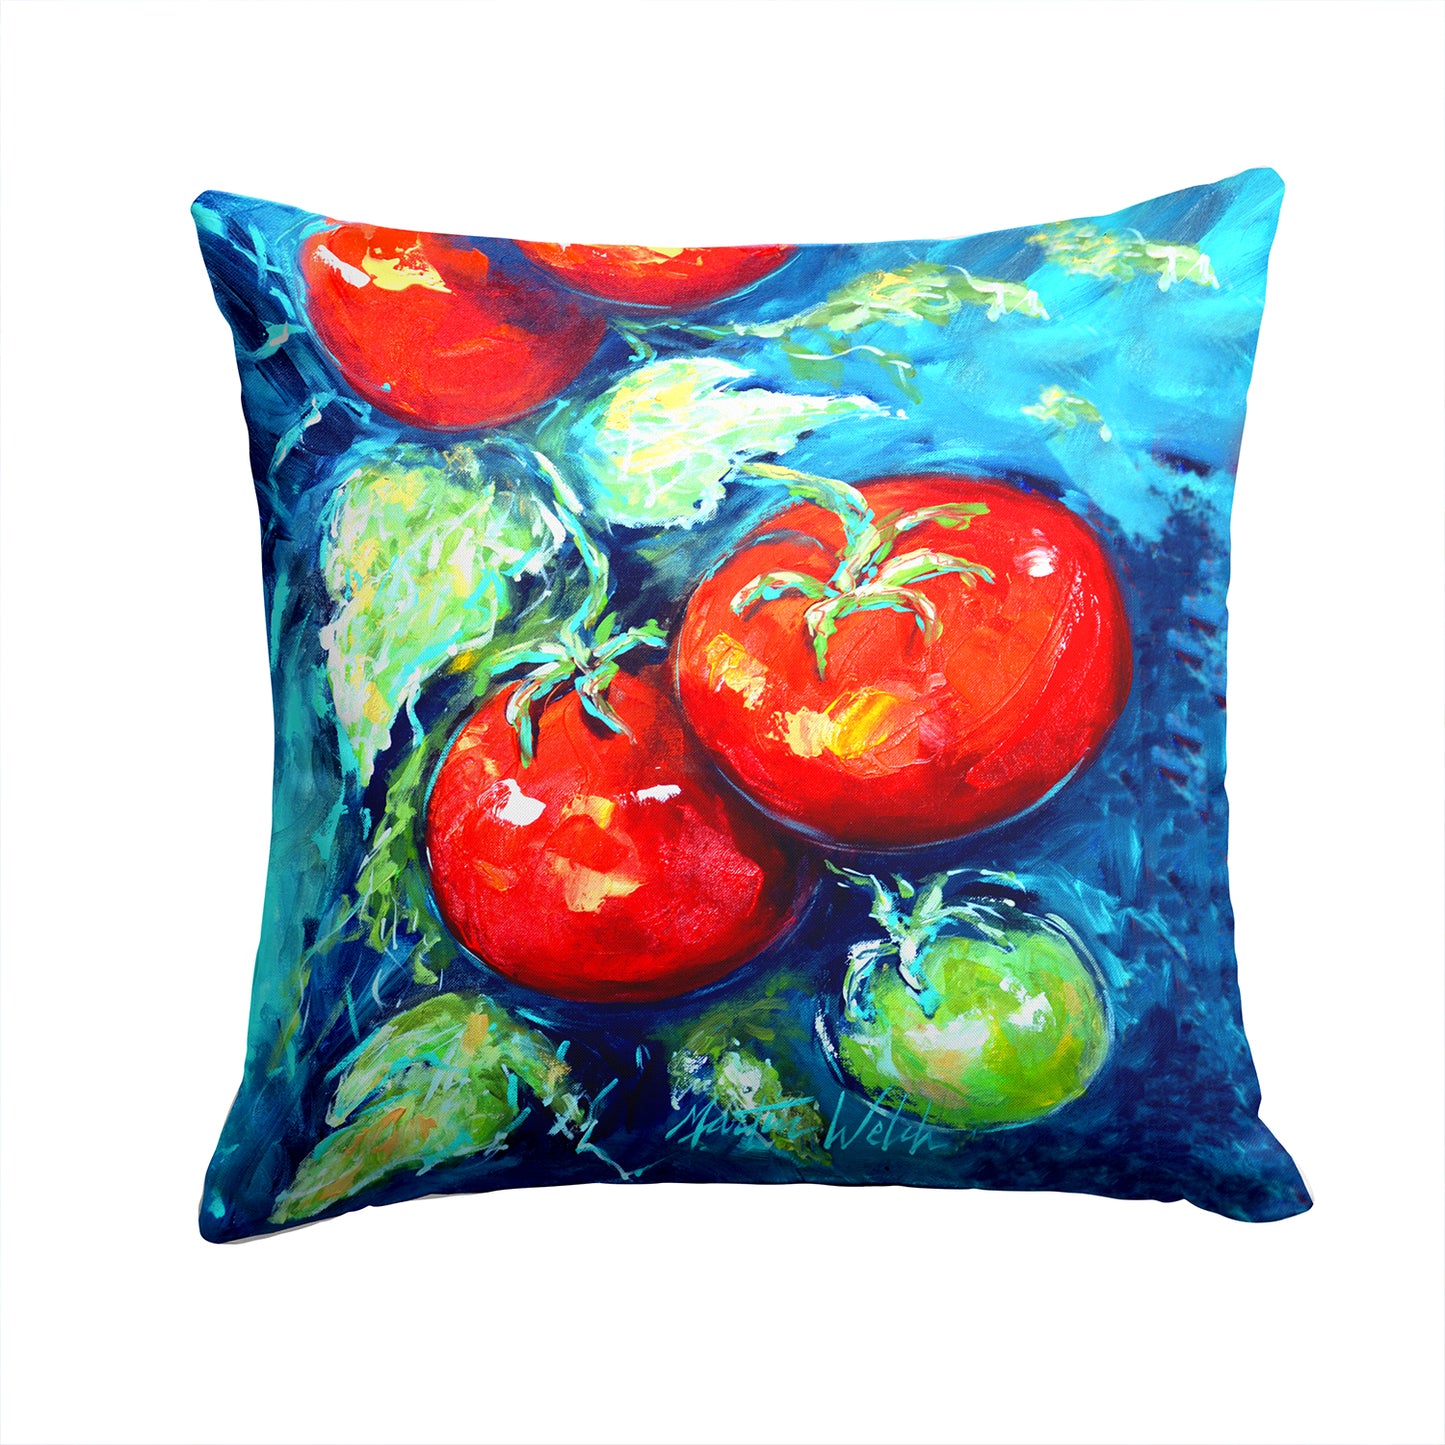 Buy this Vegetables - Tomatoes on the vine Fabric Decorative Pillow